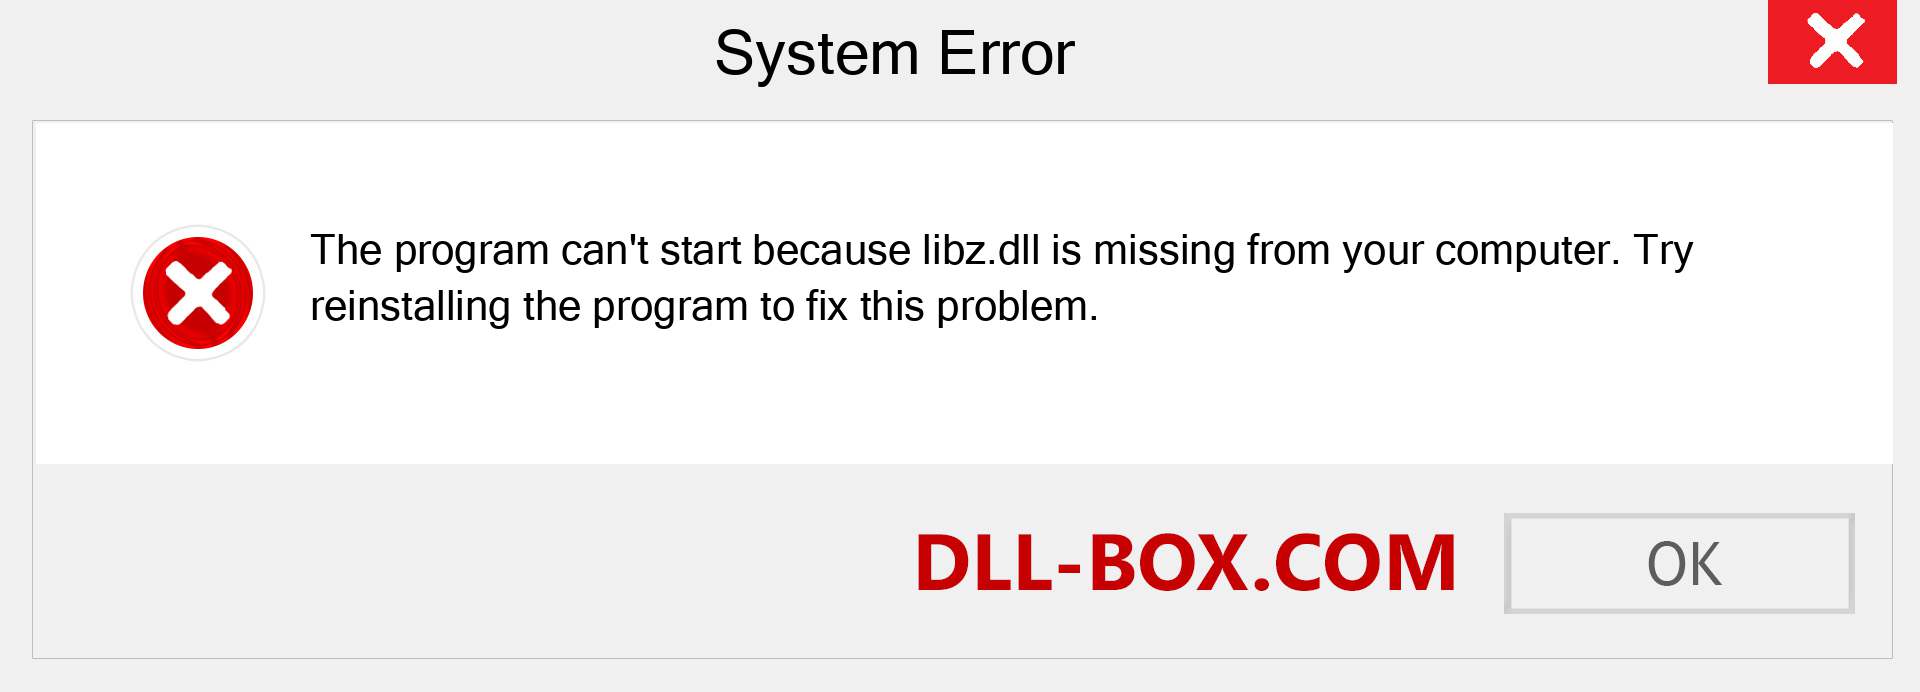  libz.dll file is missing?. Download for Windows 7, 8, 10 - Fix  libz dll Missing Error on Windows, photos, images